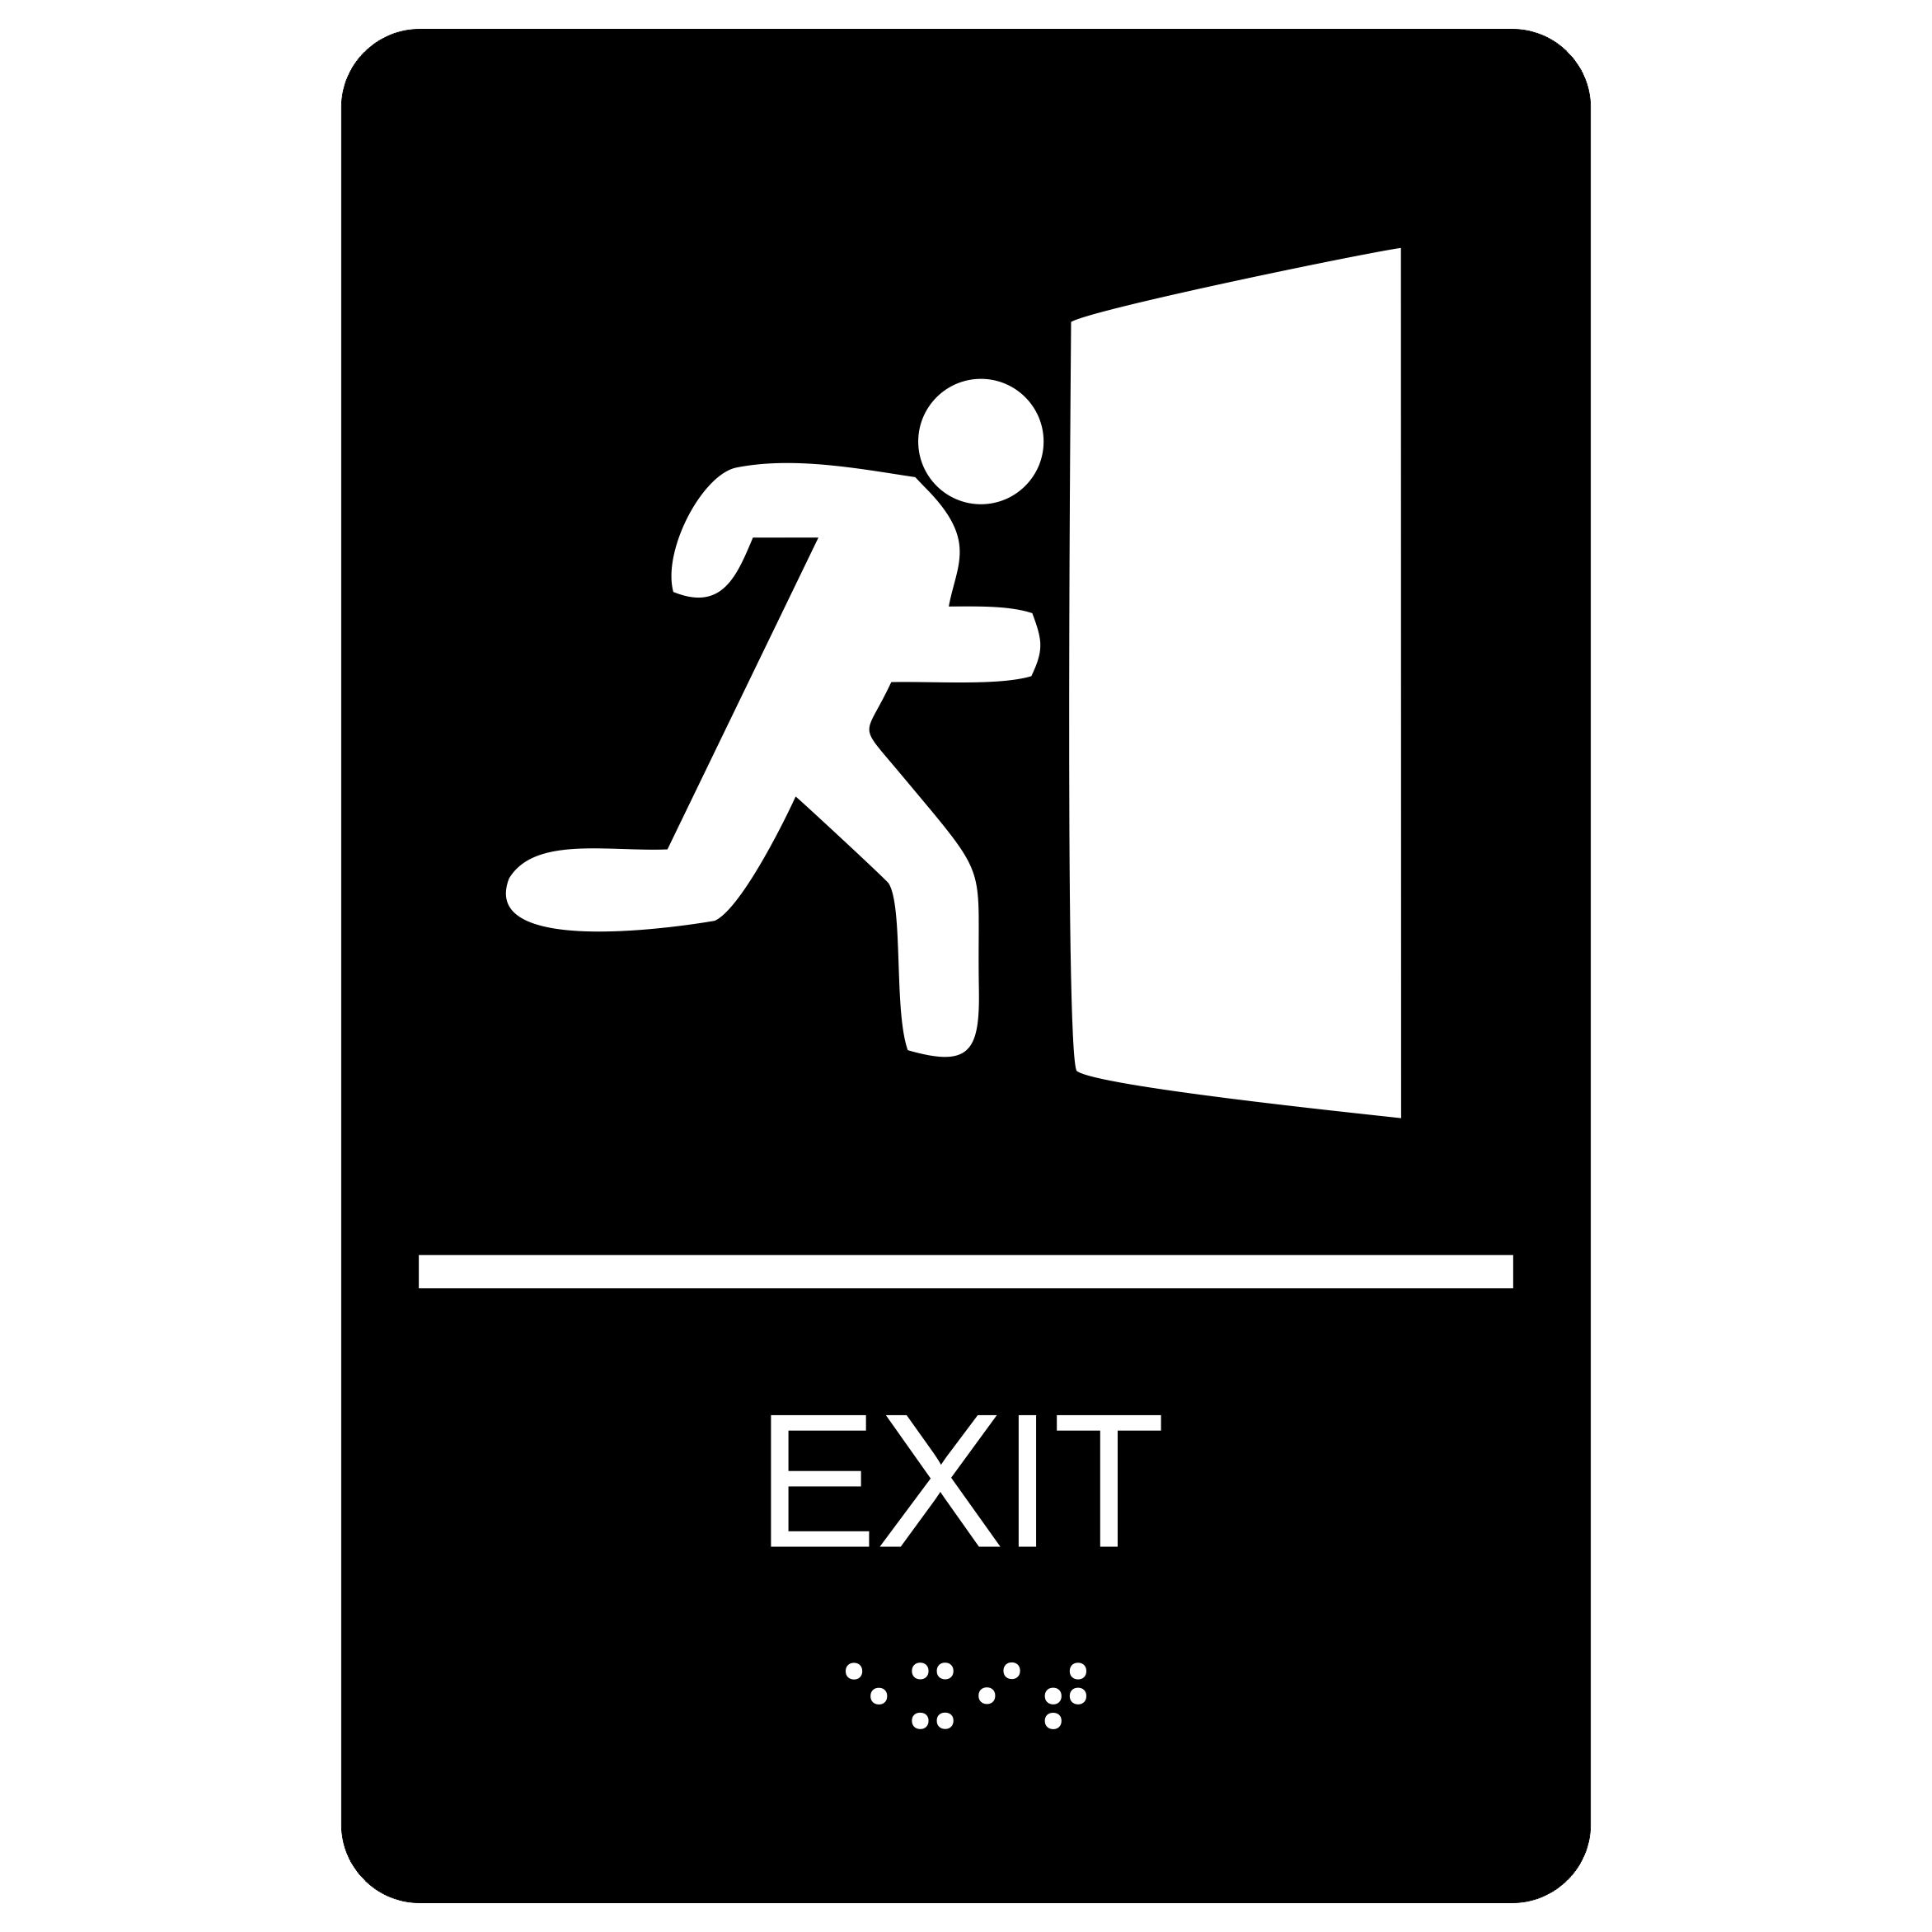 ADA EXIT SIGN  BRAILLE AT BOTTOM  9" X 6"  Free Shipping US only 